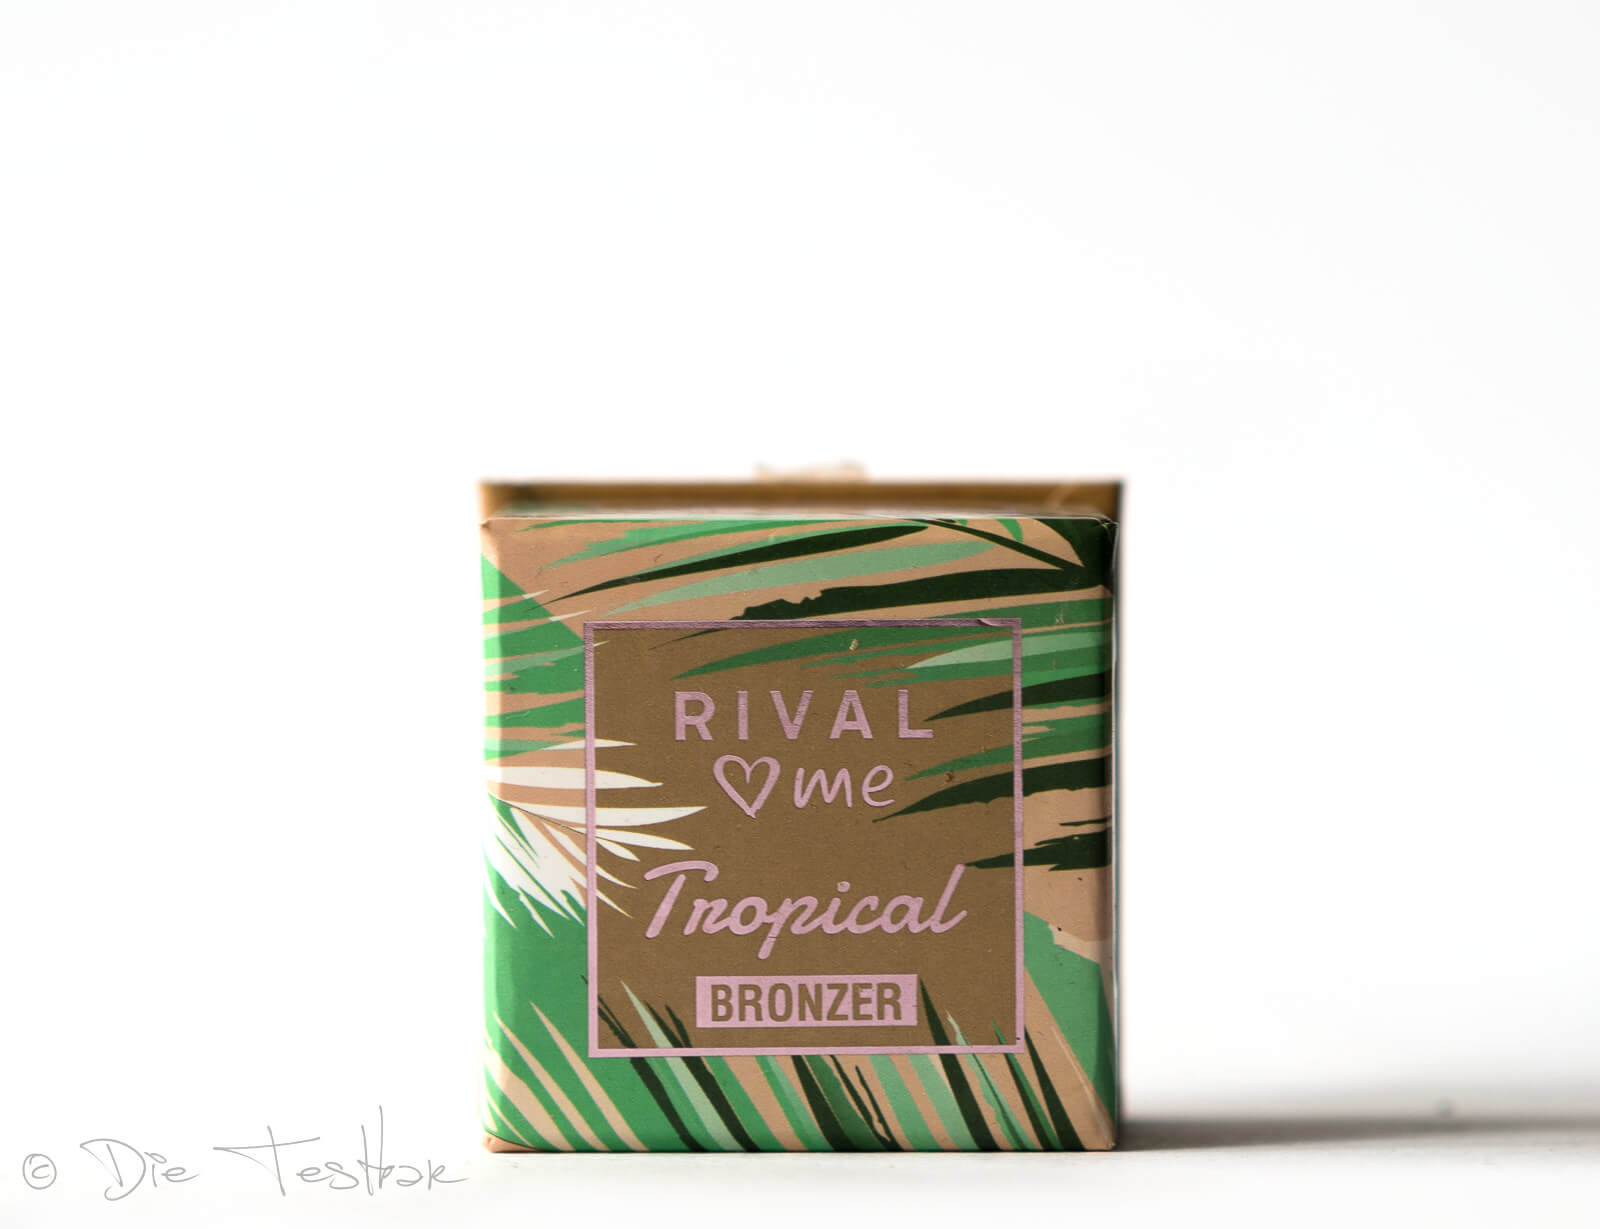 Review - RIVAL loves me - Tropical Bronzer 1